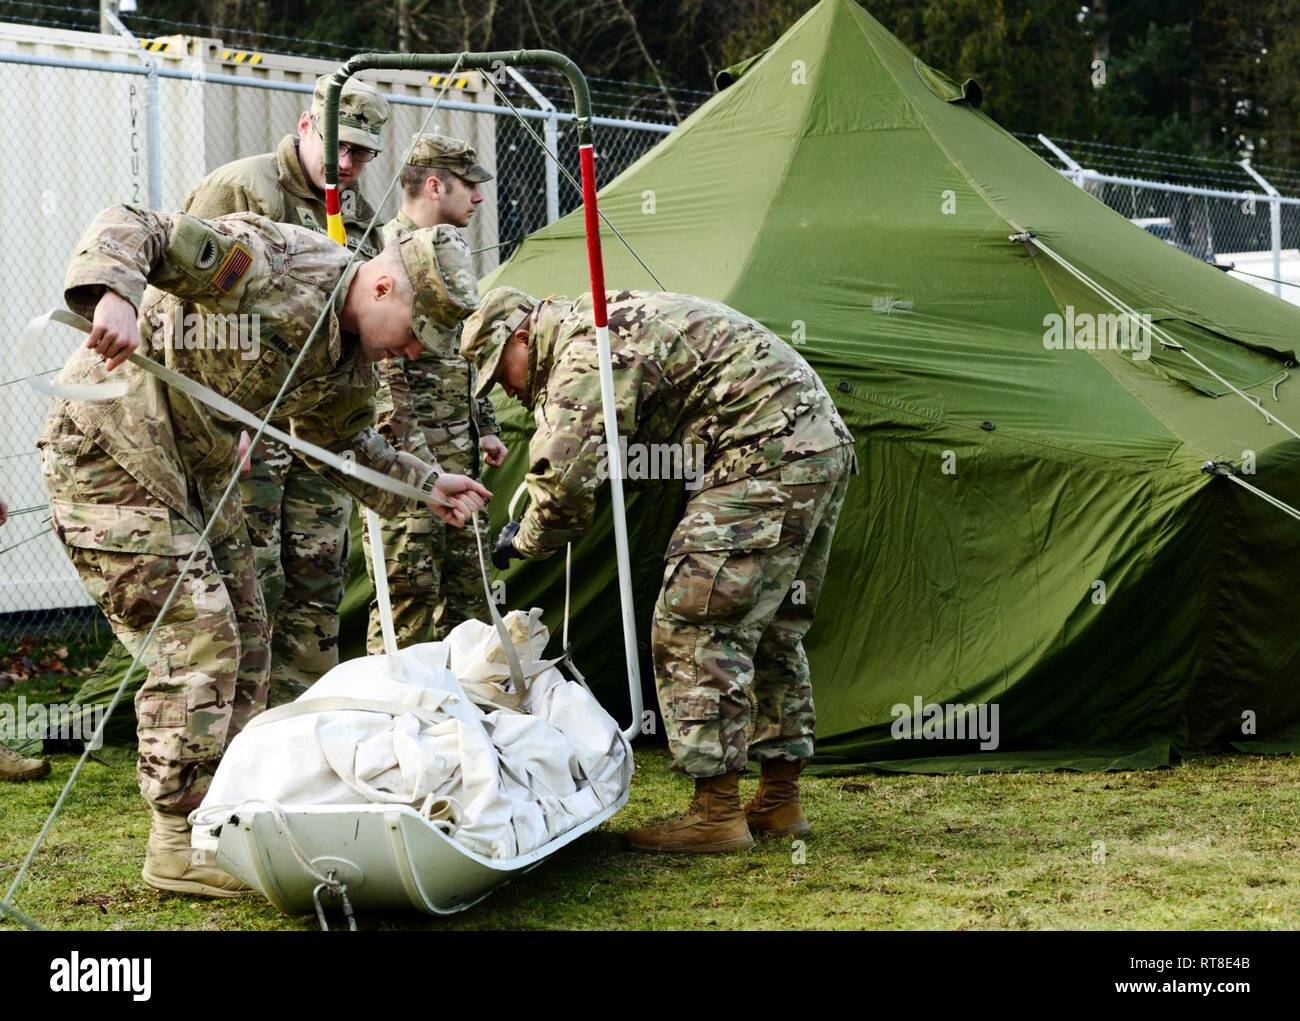 Oregon Army National Guard Spc. Alexander Beglau (left), alongside fellow Soldiers with 2nd Battalion, 162nd Infantry Regiment, 41st Infantry Brigade Combat Team, practices setting up a Canadian Army Reserve tent kit in preparation for the Westie Avalanche Exercise, January 25, 2019, at the Chilliwack Armoury, in Chilliwack, British Columbia, Canada. Nearly 40 Oregon Army National Guard Soldiers traveled to British Columbia to participate in basic winter survival skills training and work shoulder-to-shoulder with Canadian Army Reserve allies with the Royal Westminster Regiment, 39th Canadian B Stock Photo